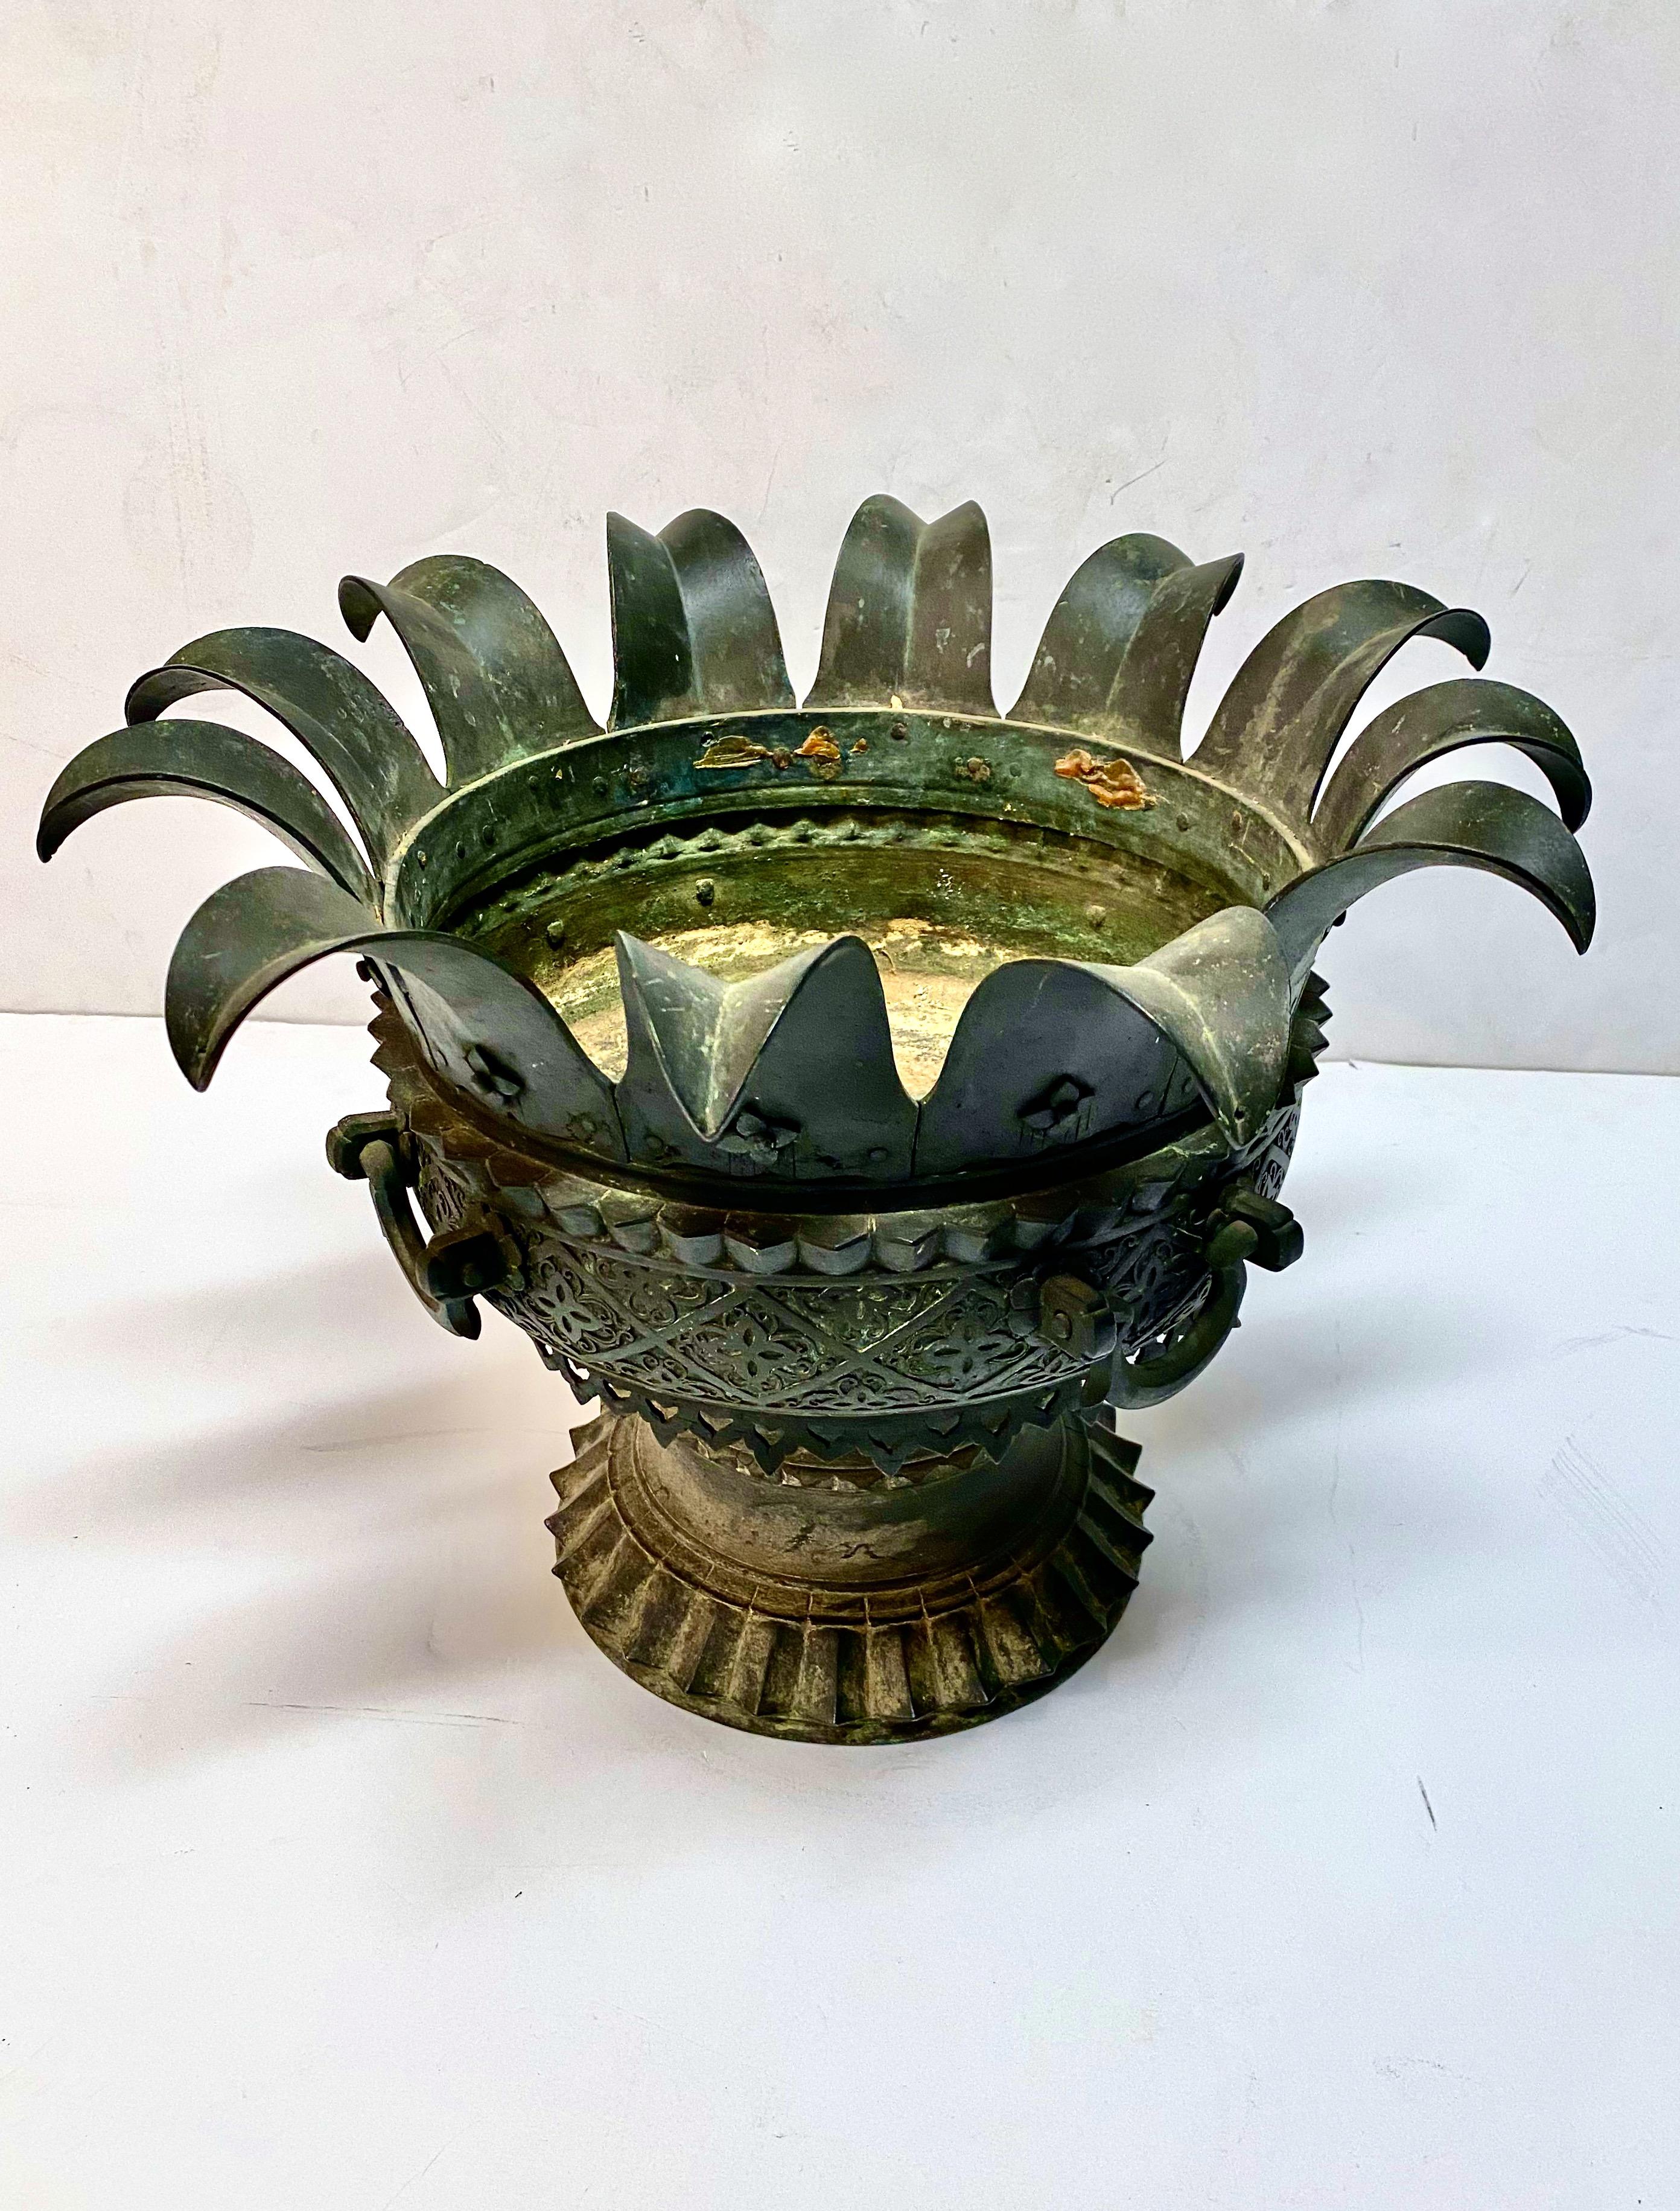 This is a highly detailed Renaissance Revival Middle Eastern inspired bronze planter. The palm fronds, unusual handles, heavy cast foot and Moorish-style fret work are indications of quality design and fabrication. This planter would make an